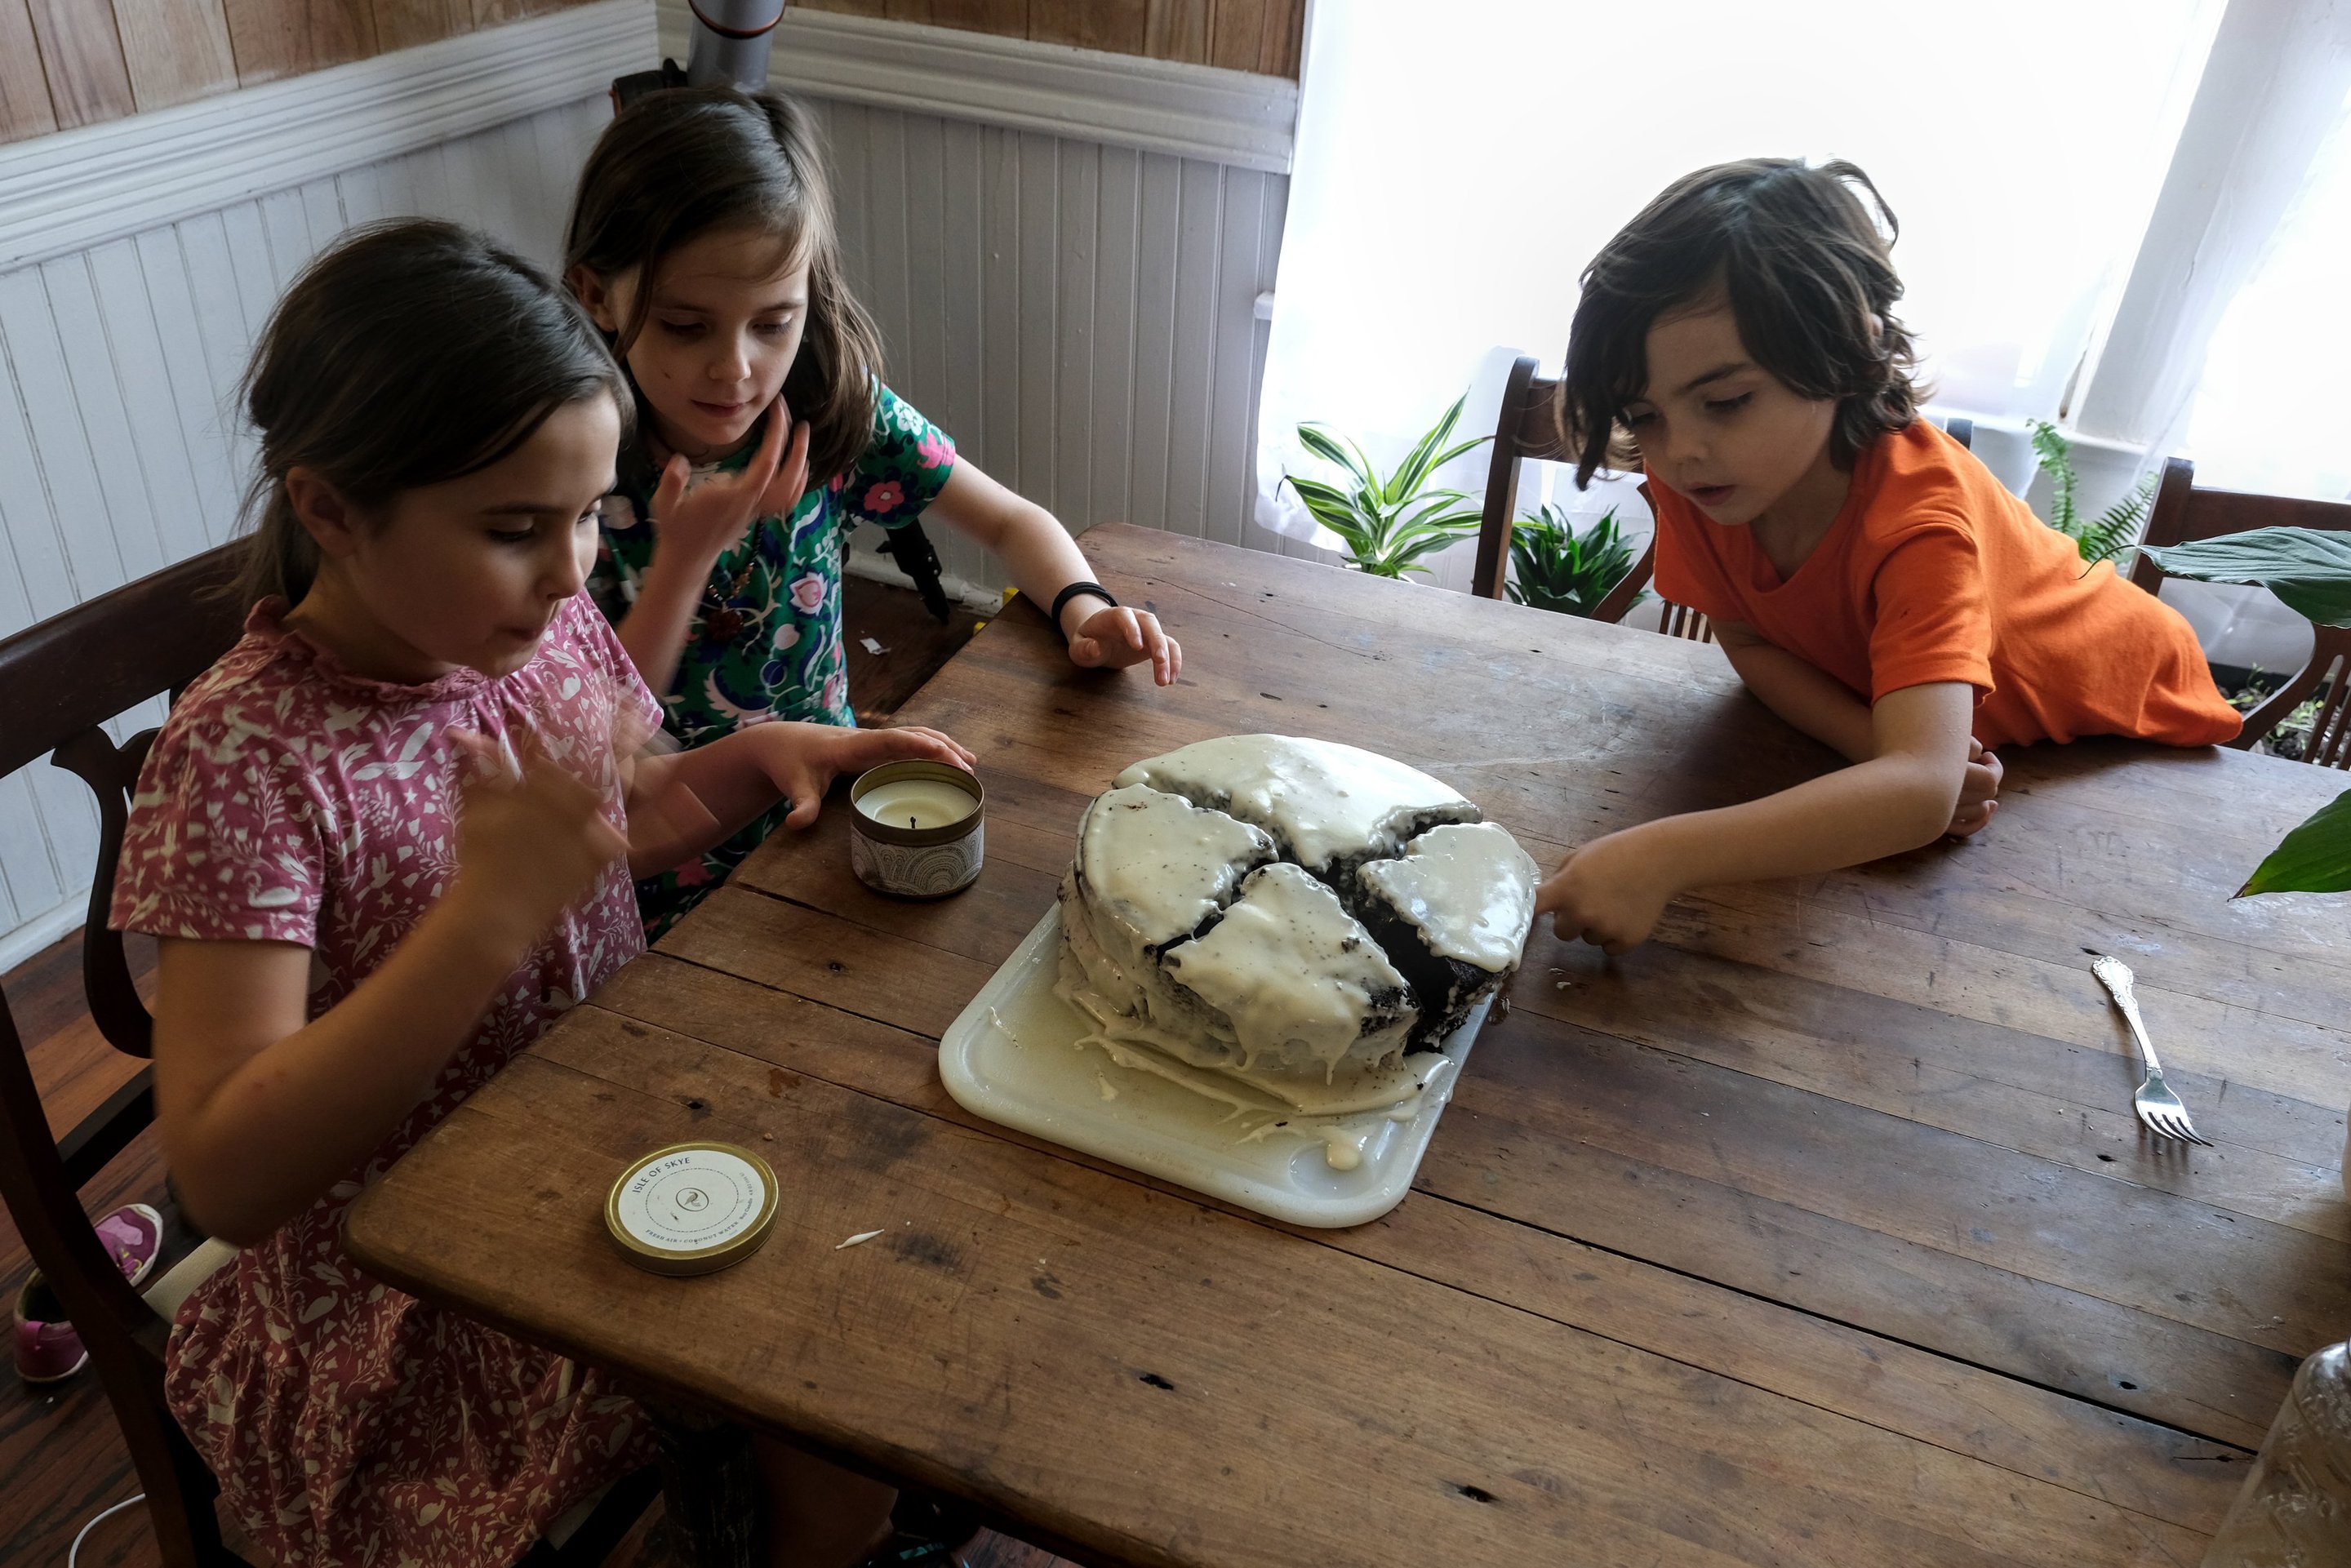 kids with a birthday cake photographed by luxagraf